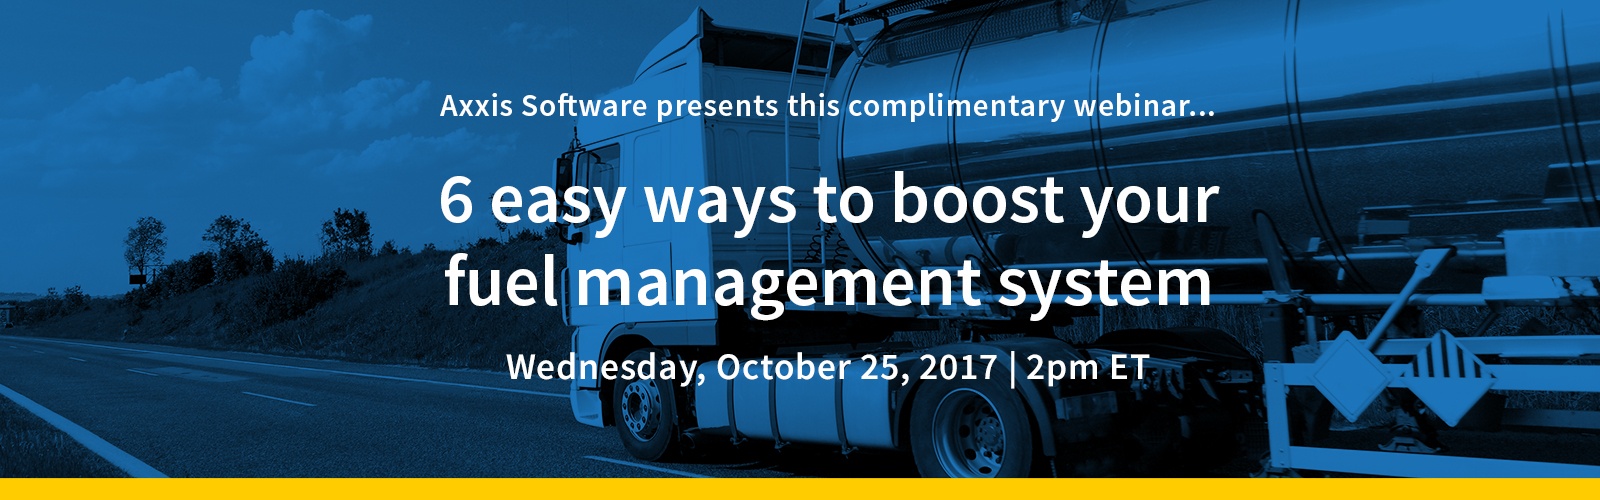 Free webinar! 6 easy steps to boost your fuel management system | Oct. 25, 2017 @ 2pm